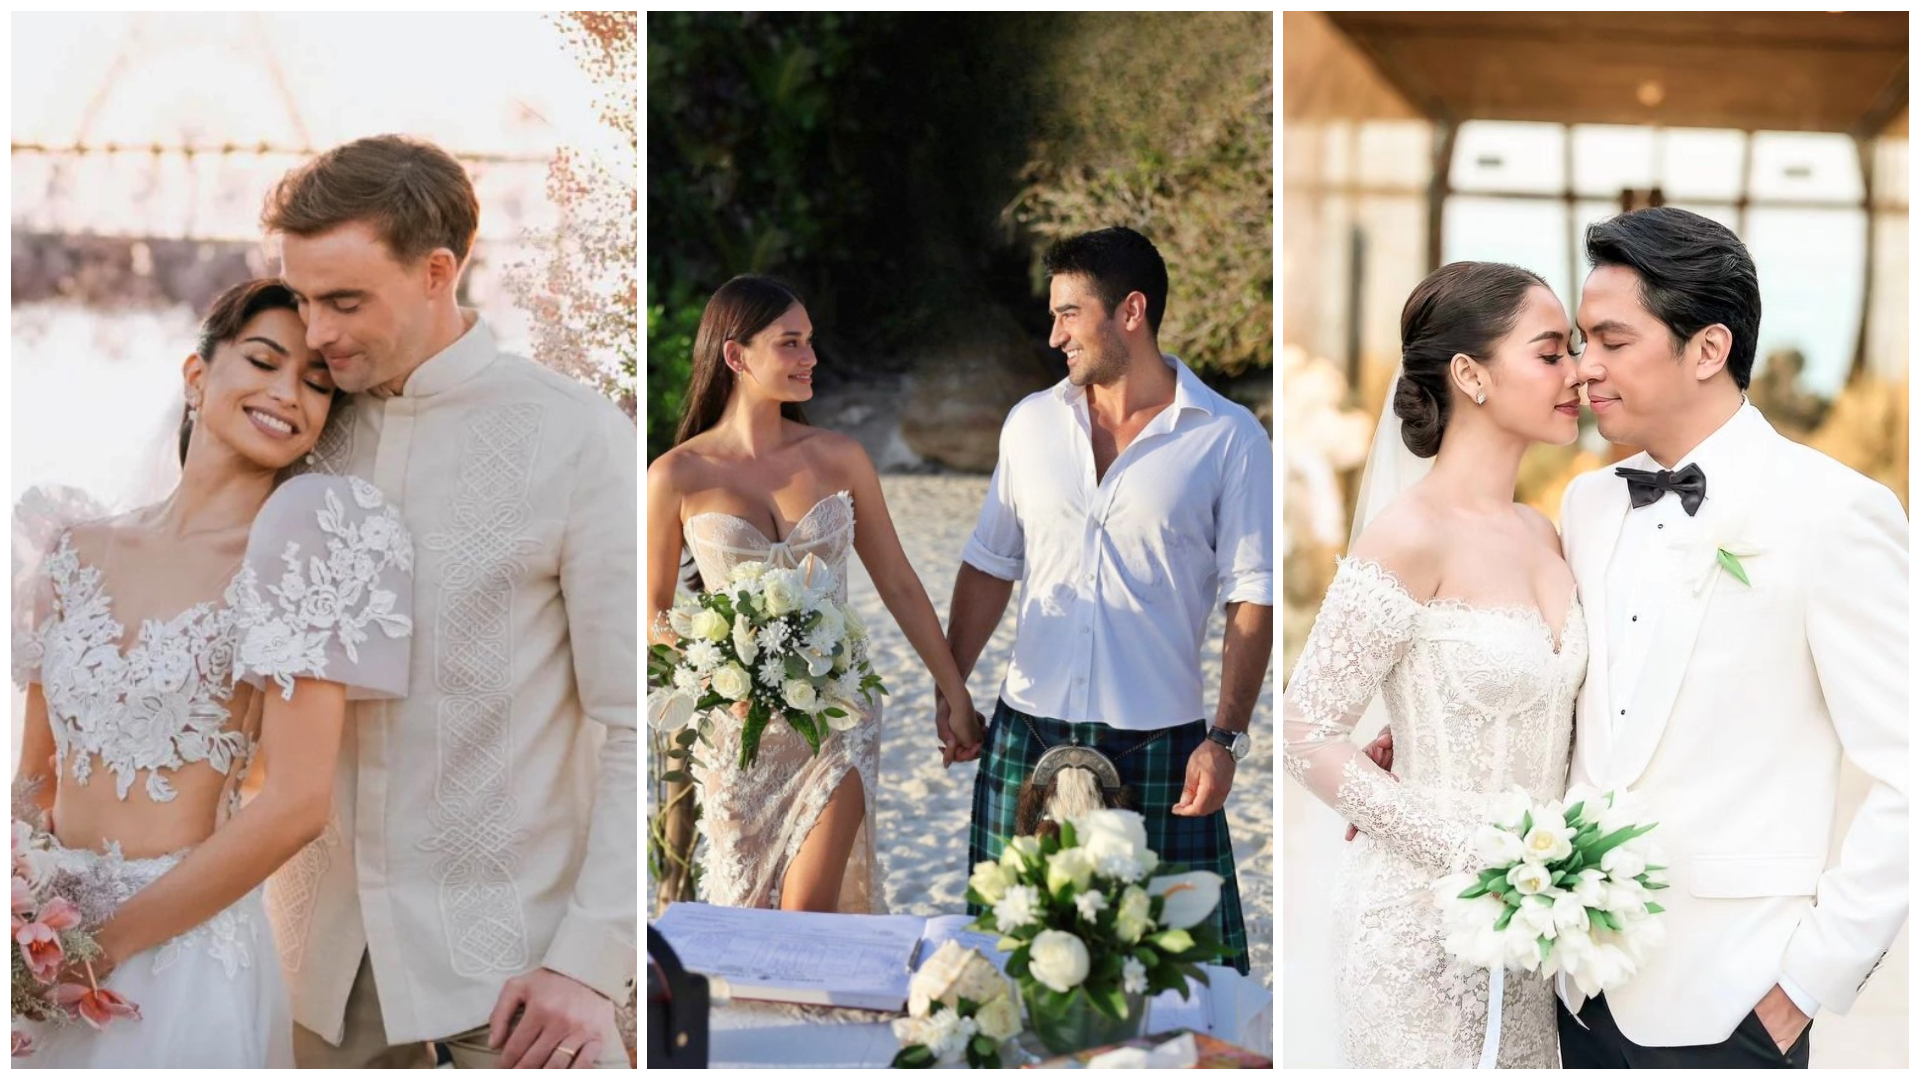 A Year of Love: 2023's Most Exciting Celebrity Weddings